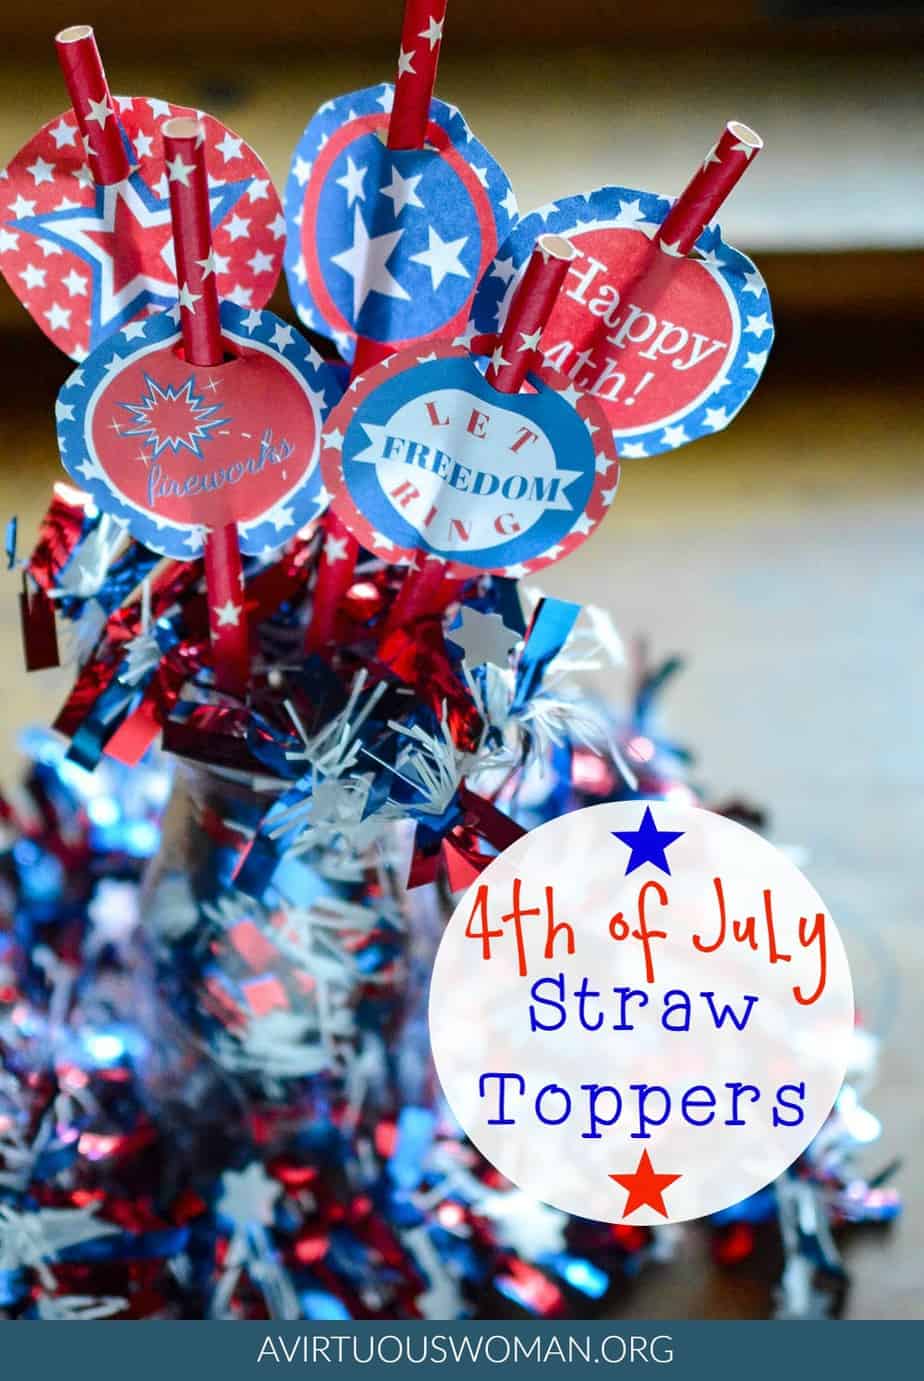 Celebrate Independence Day with these fun Free Printable 4th of July Straw Toppers @ AVirtuousWoman.org